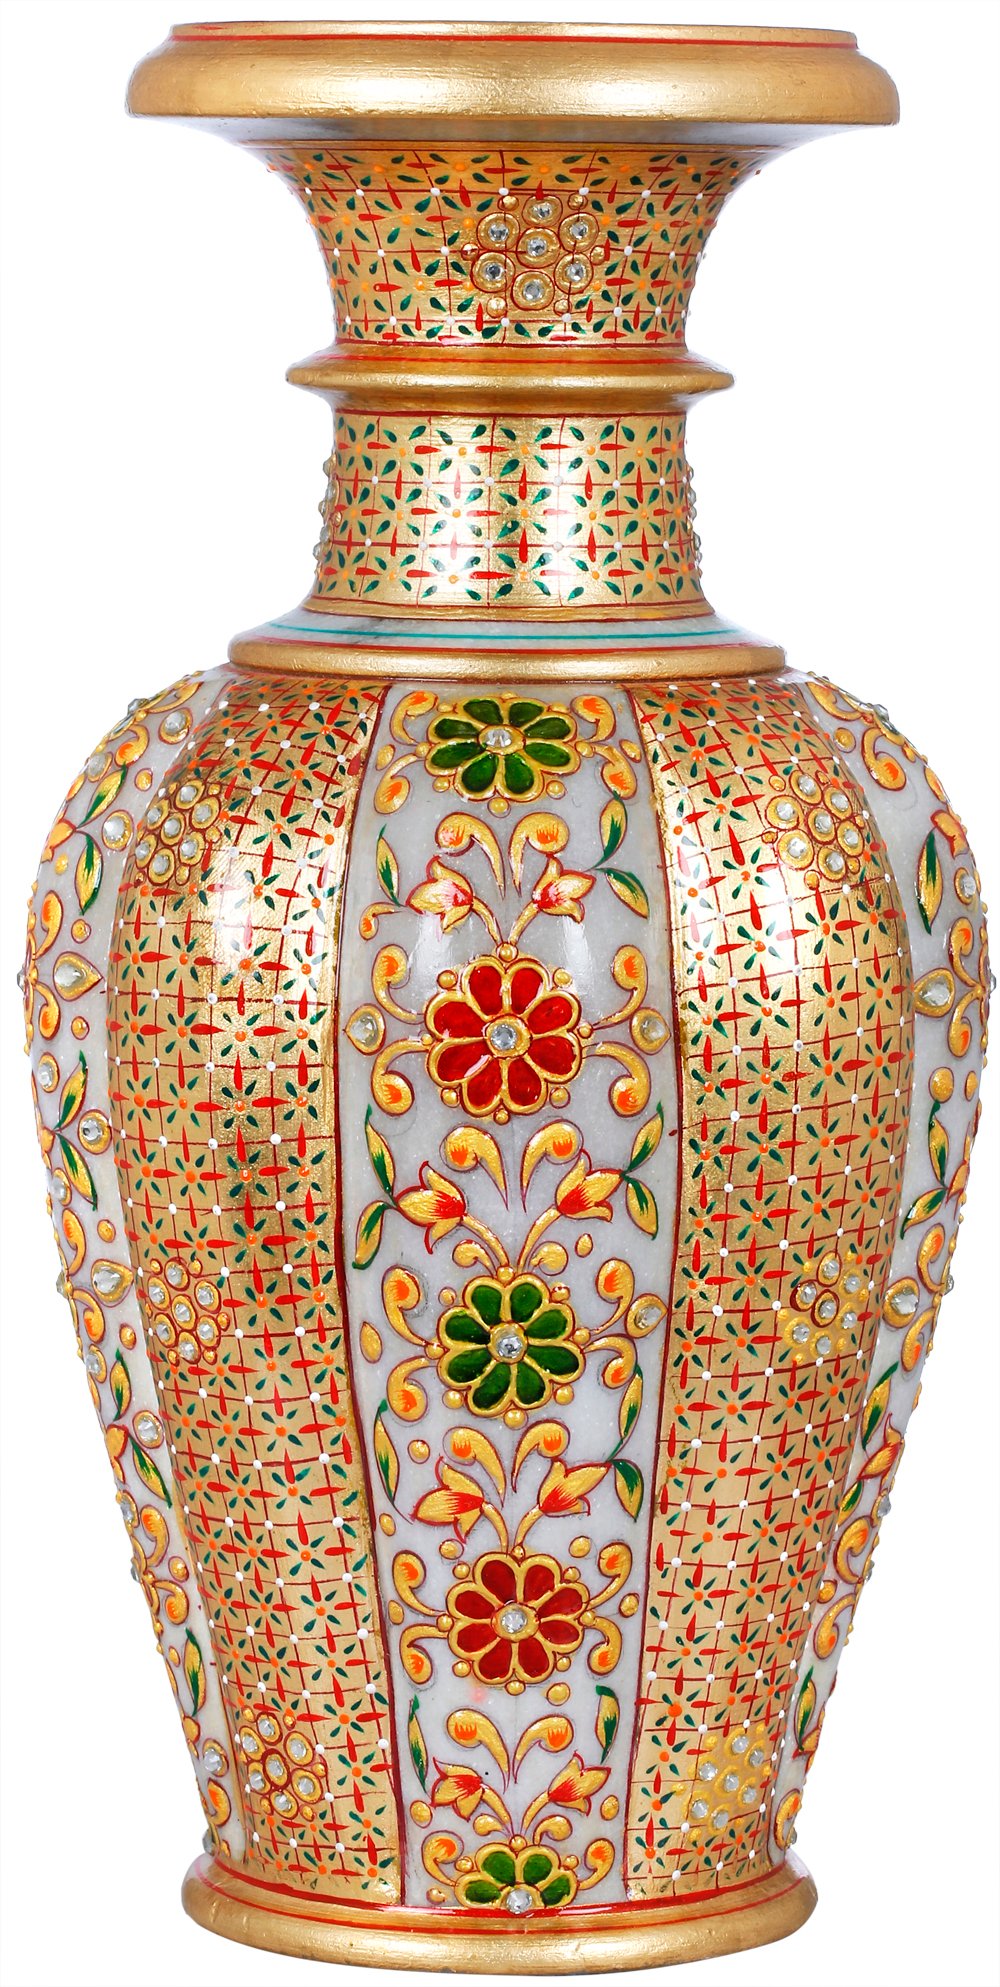 Inches Green Marble Flower Vase with Royal Look Lapis Lazuli Stones  Inlaid Decorative Planter from Indian Art and Crafts 